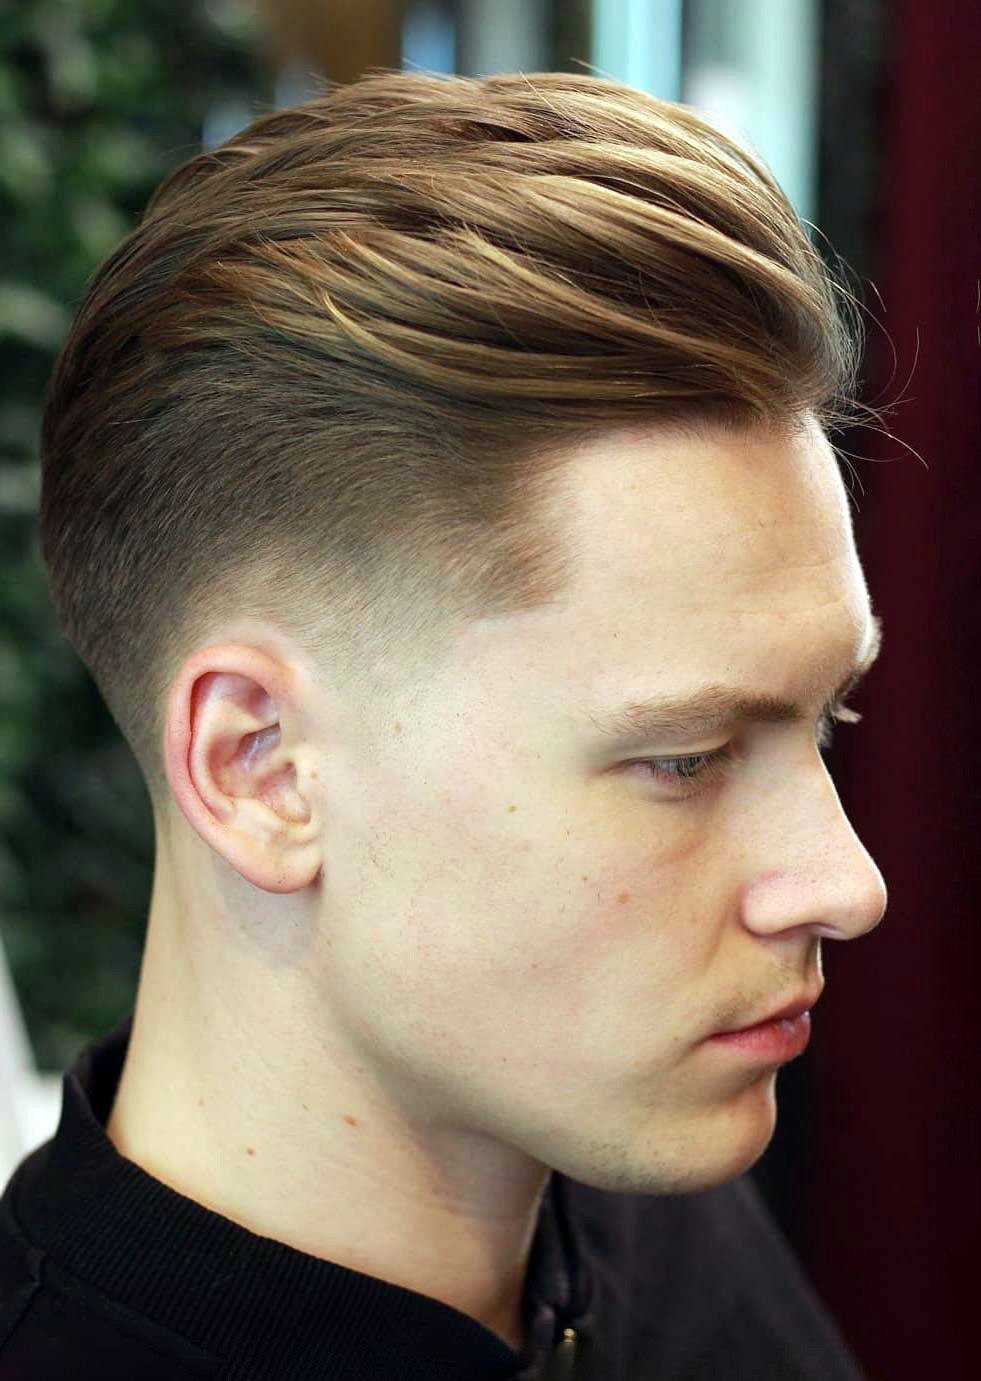 50 Great Drop Fade Haircut: Drop Fade Hairstyles Ideas to Try Now